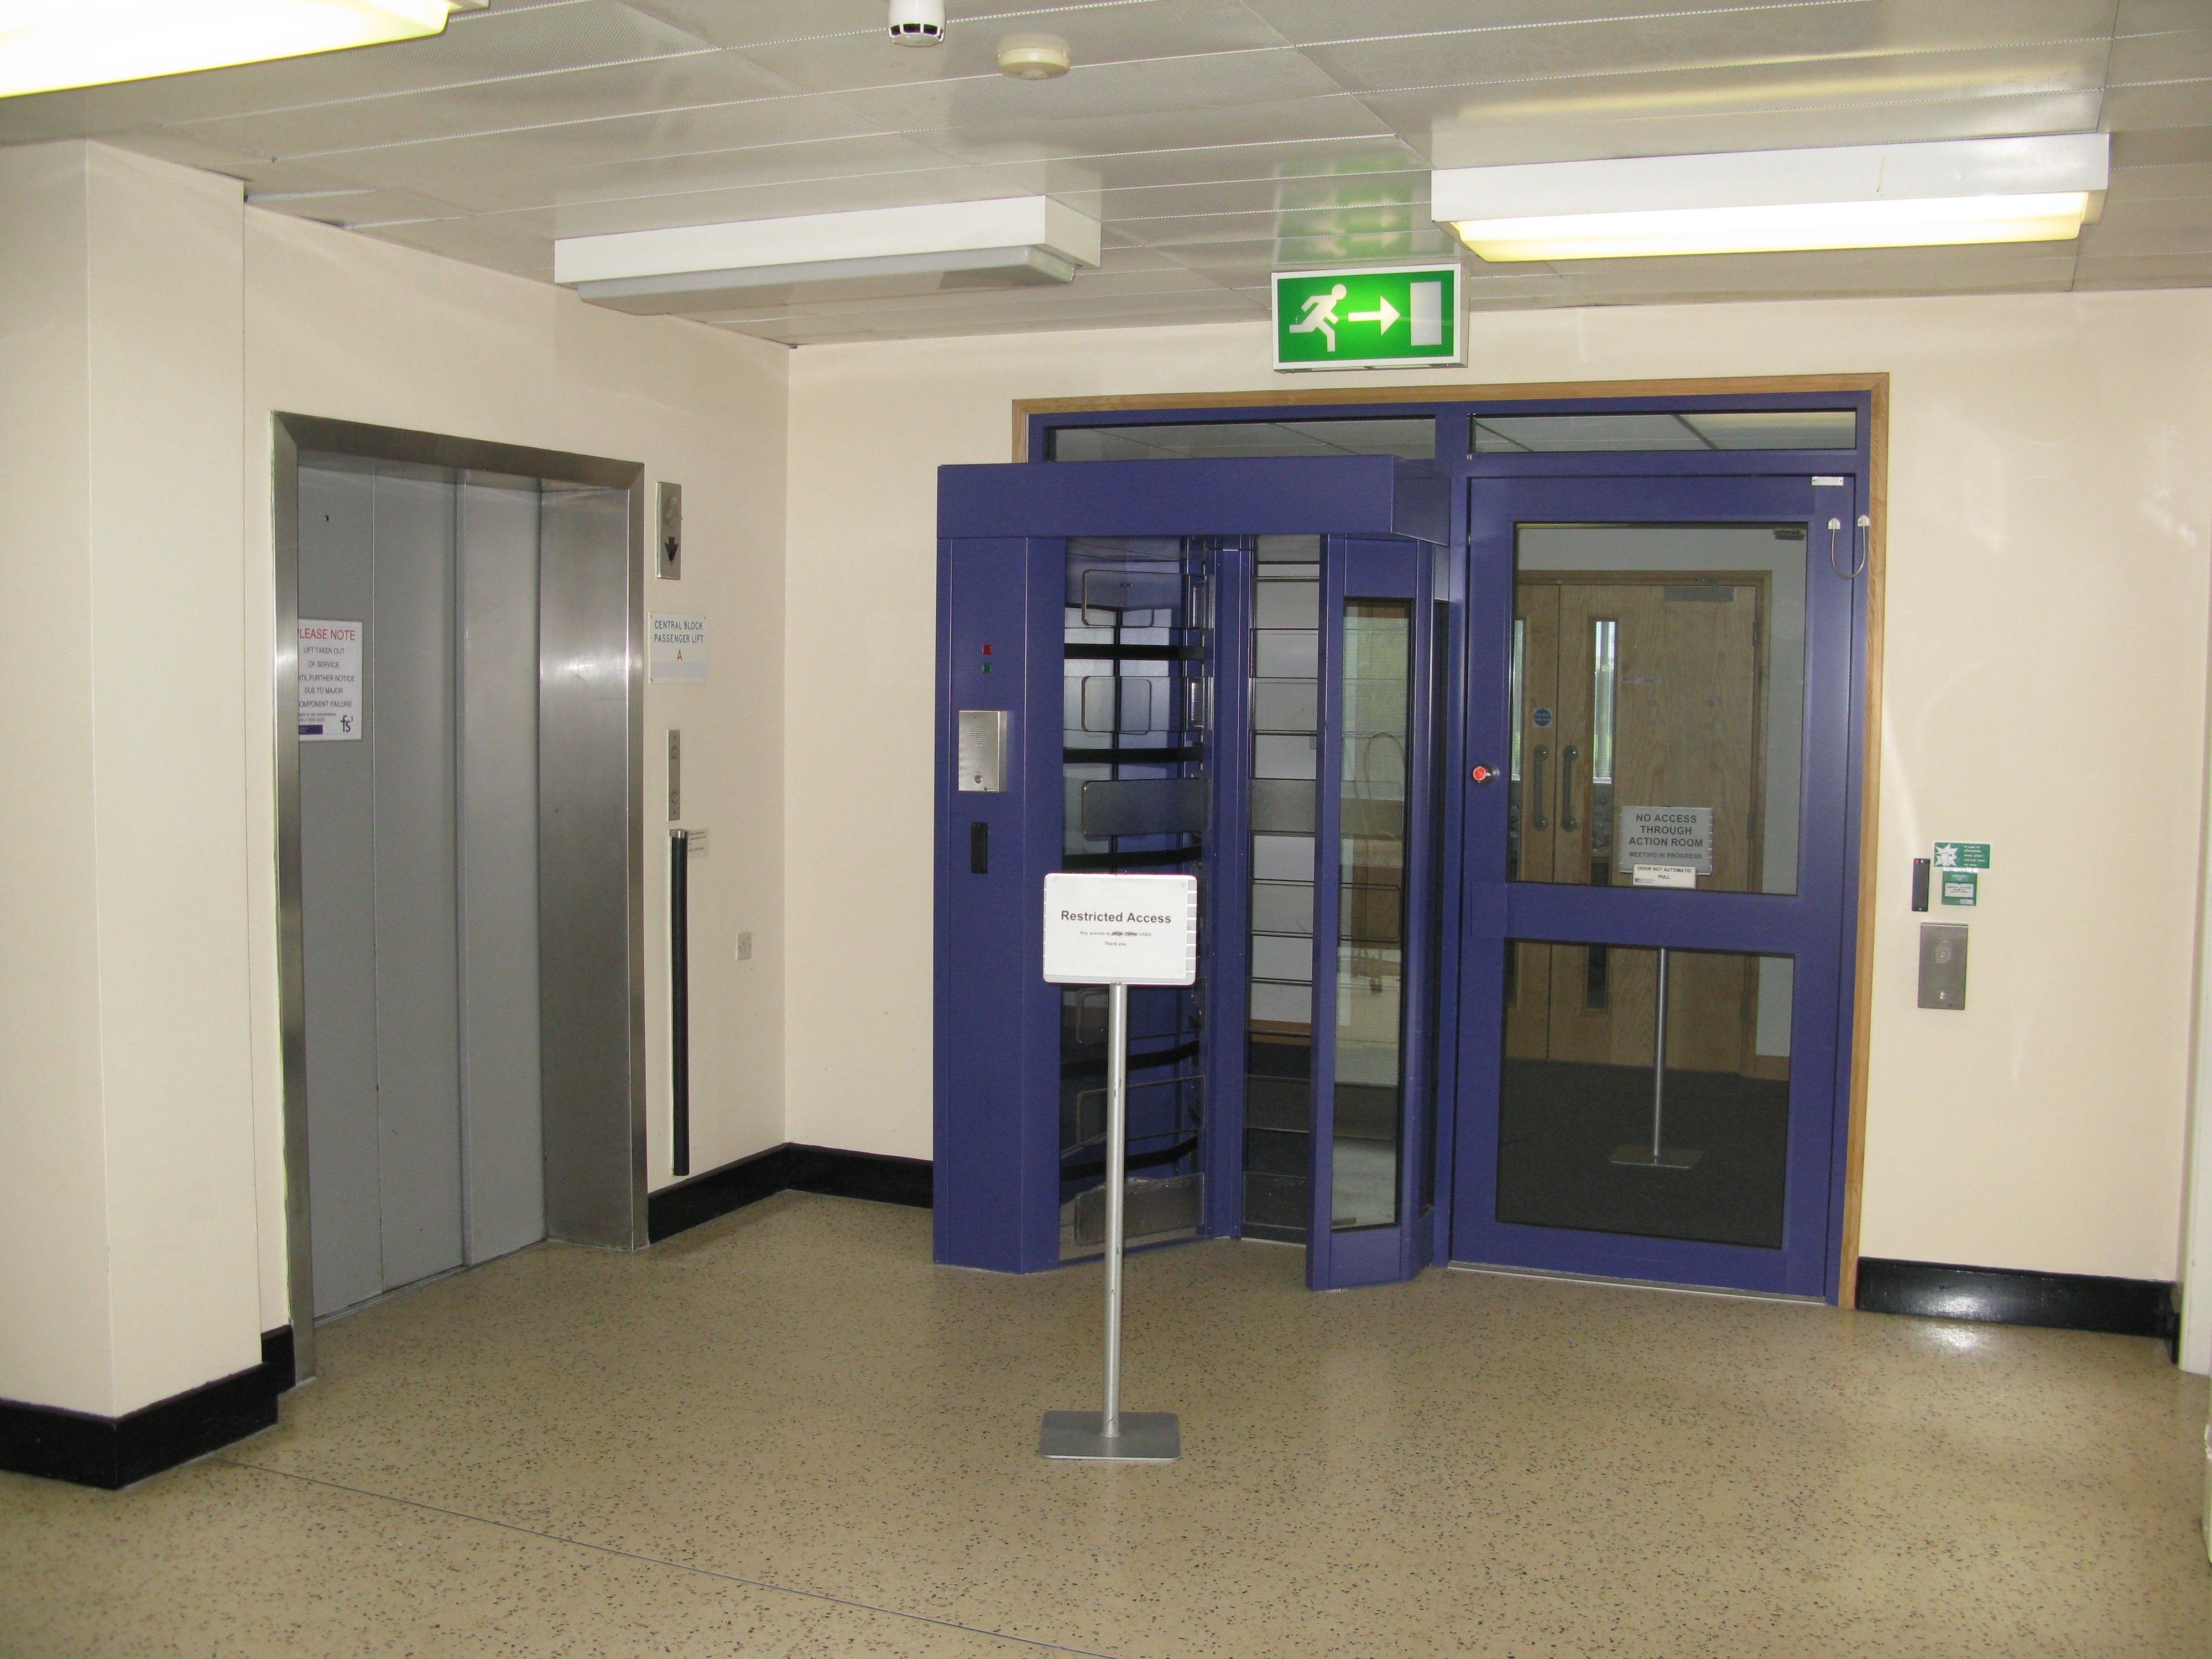 A Core ground floor lift lobby and turnstile